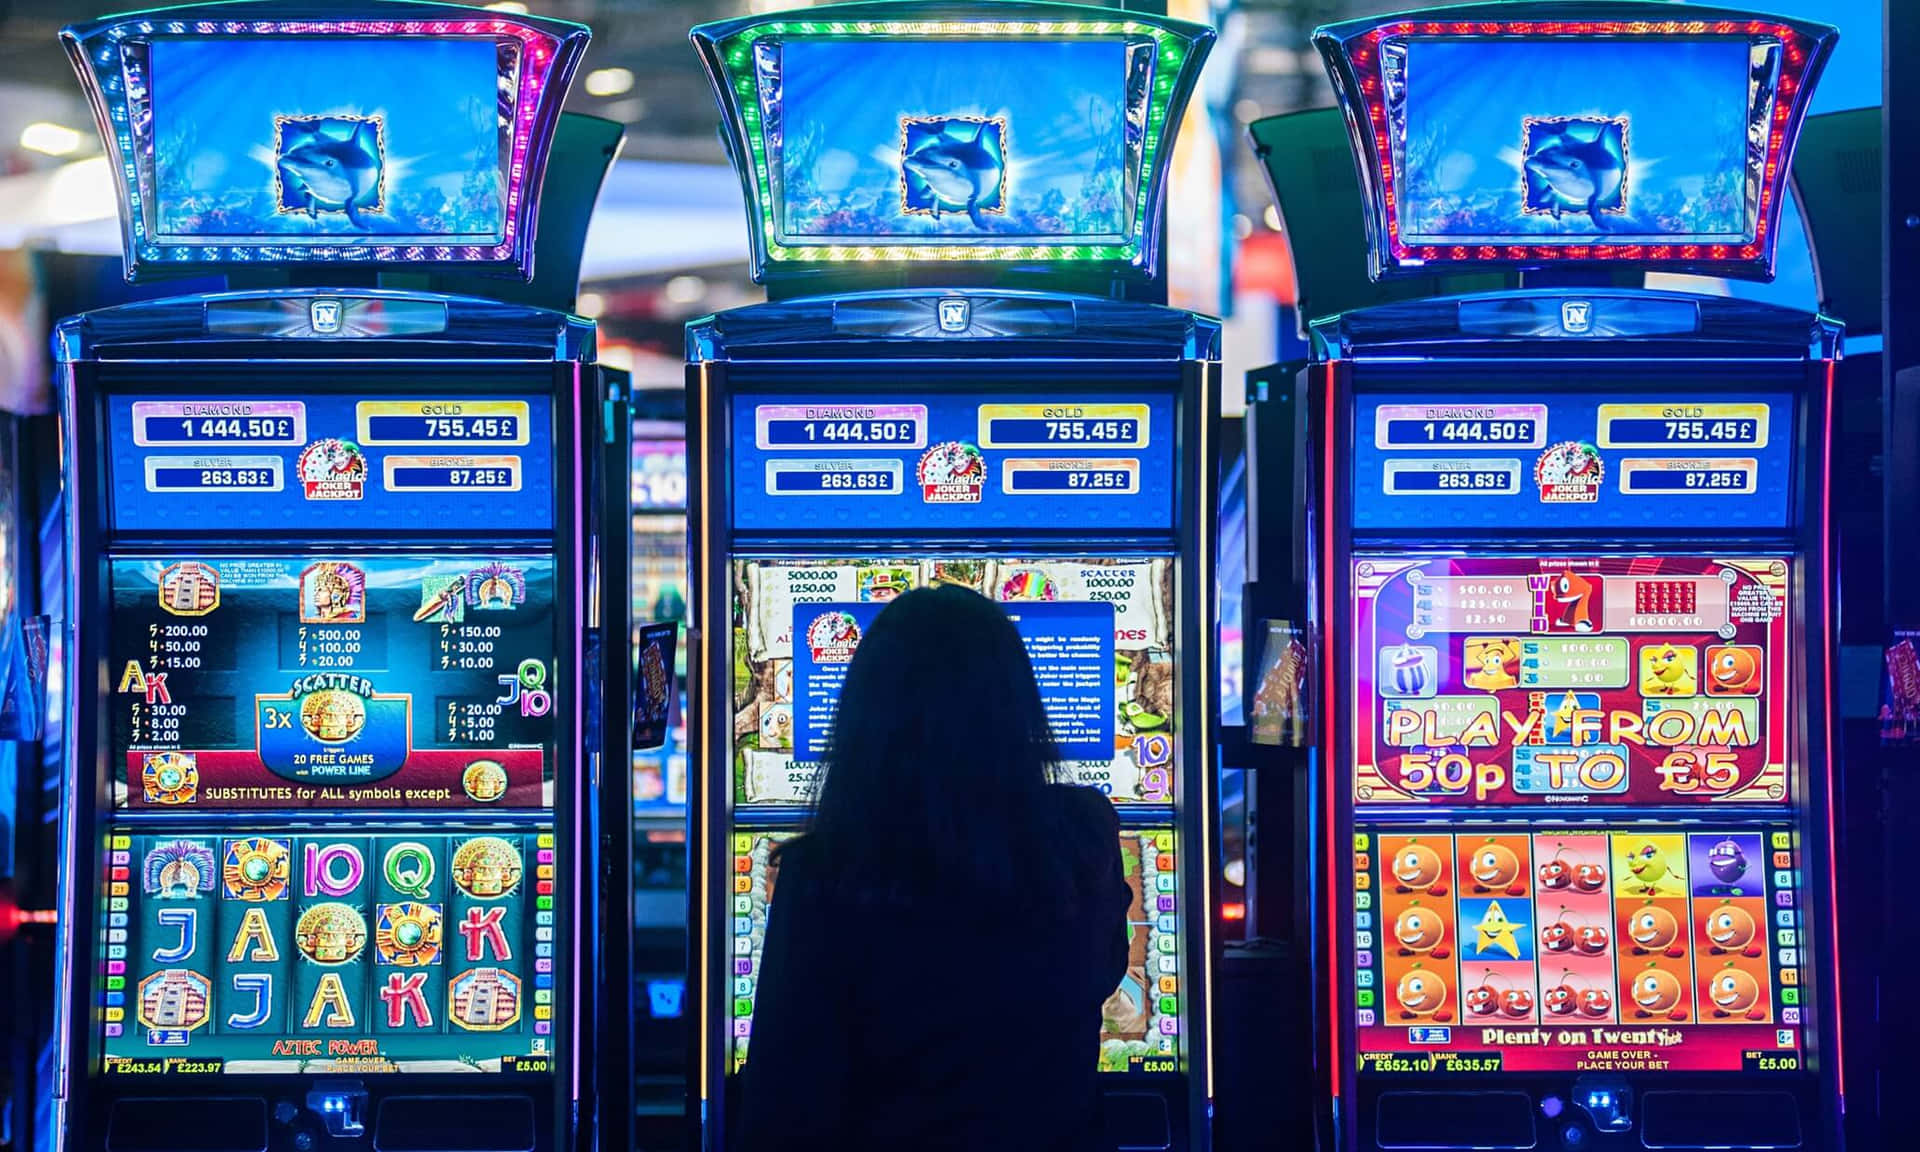 Enjoy the exciting rush of gambling by playing the Slot Machine